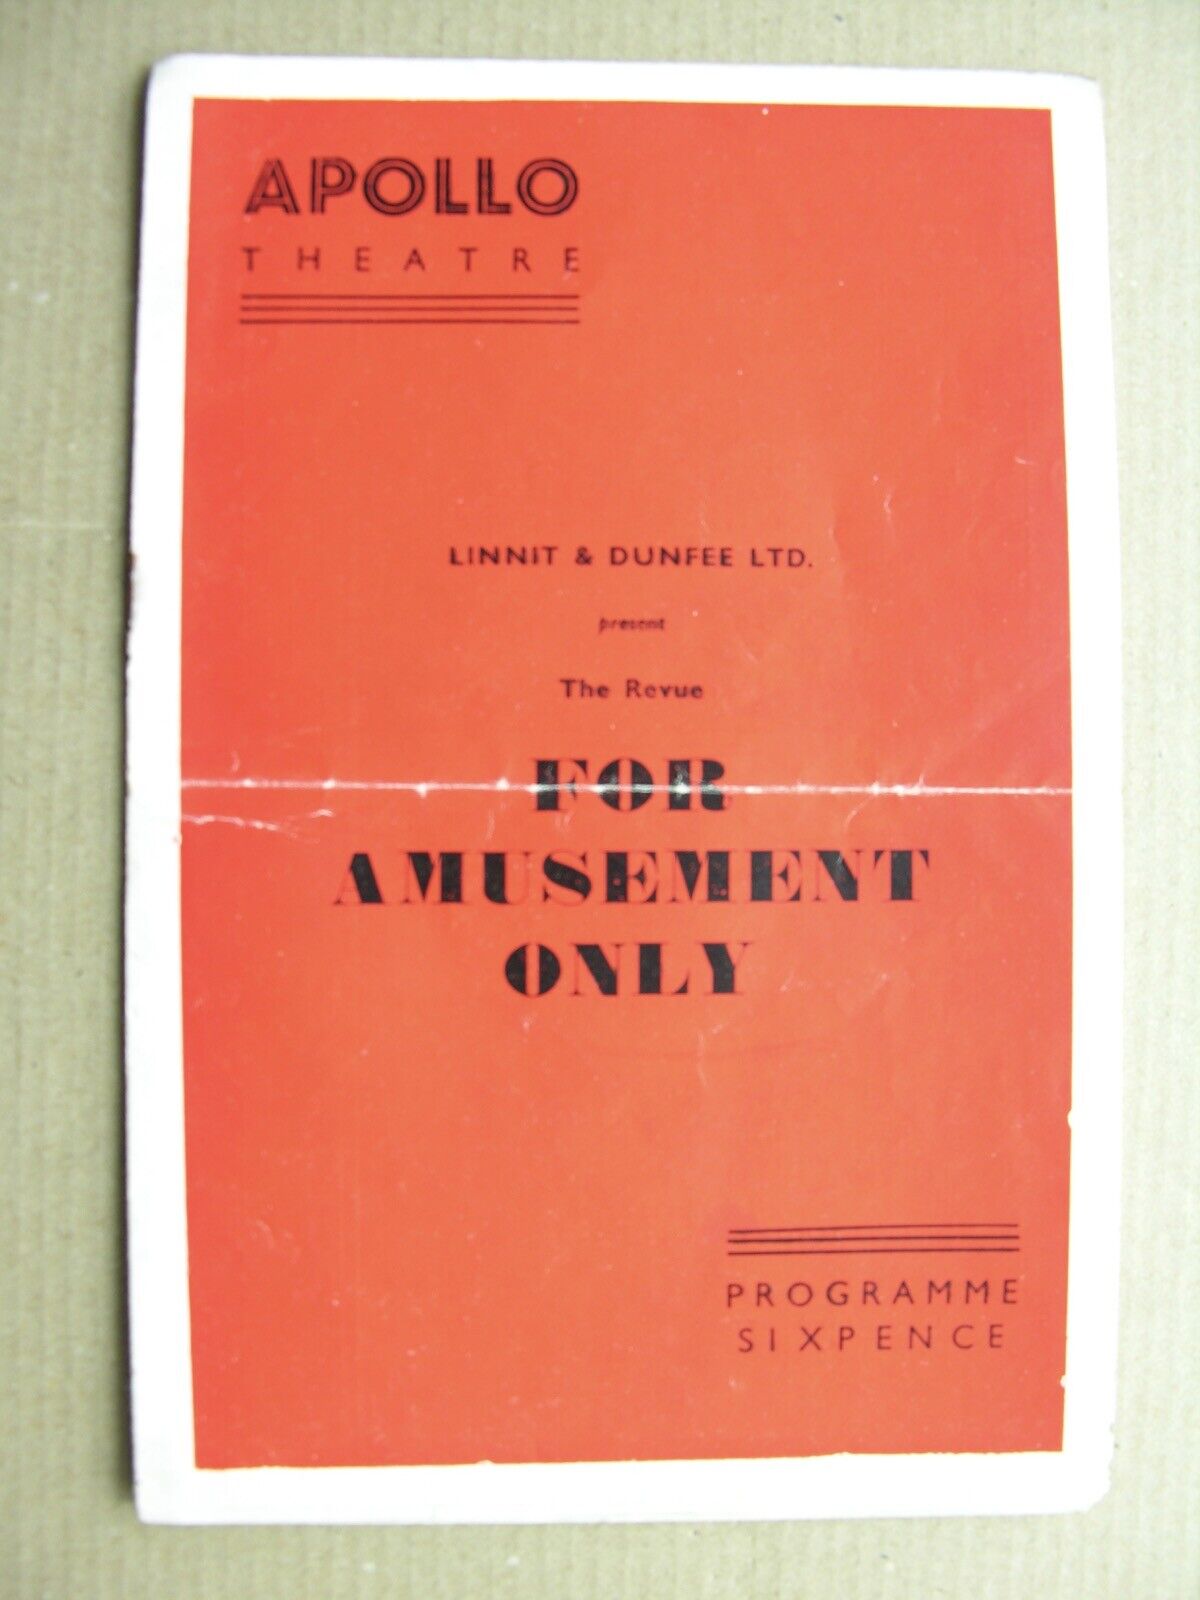 1956 FOR AMUSEMENT ONLY Ron Moody Barry Took Wallas Eaton Barry Gosney APOLLO